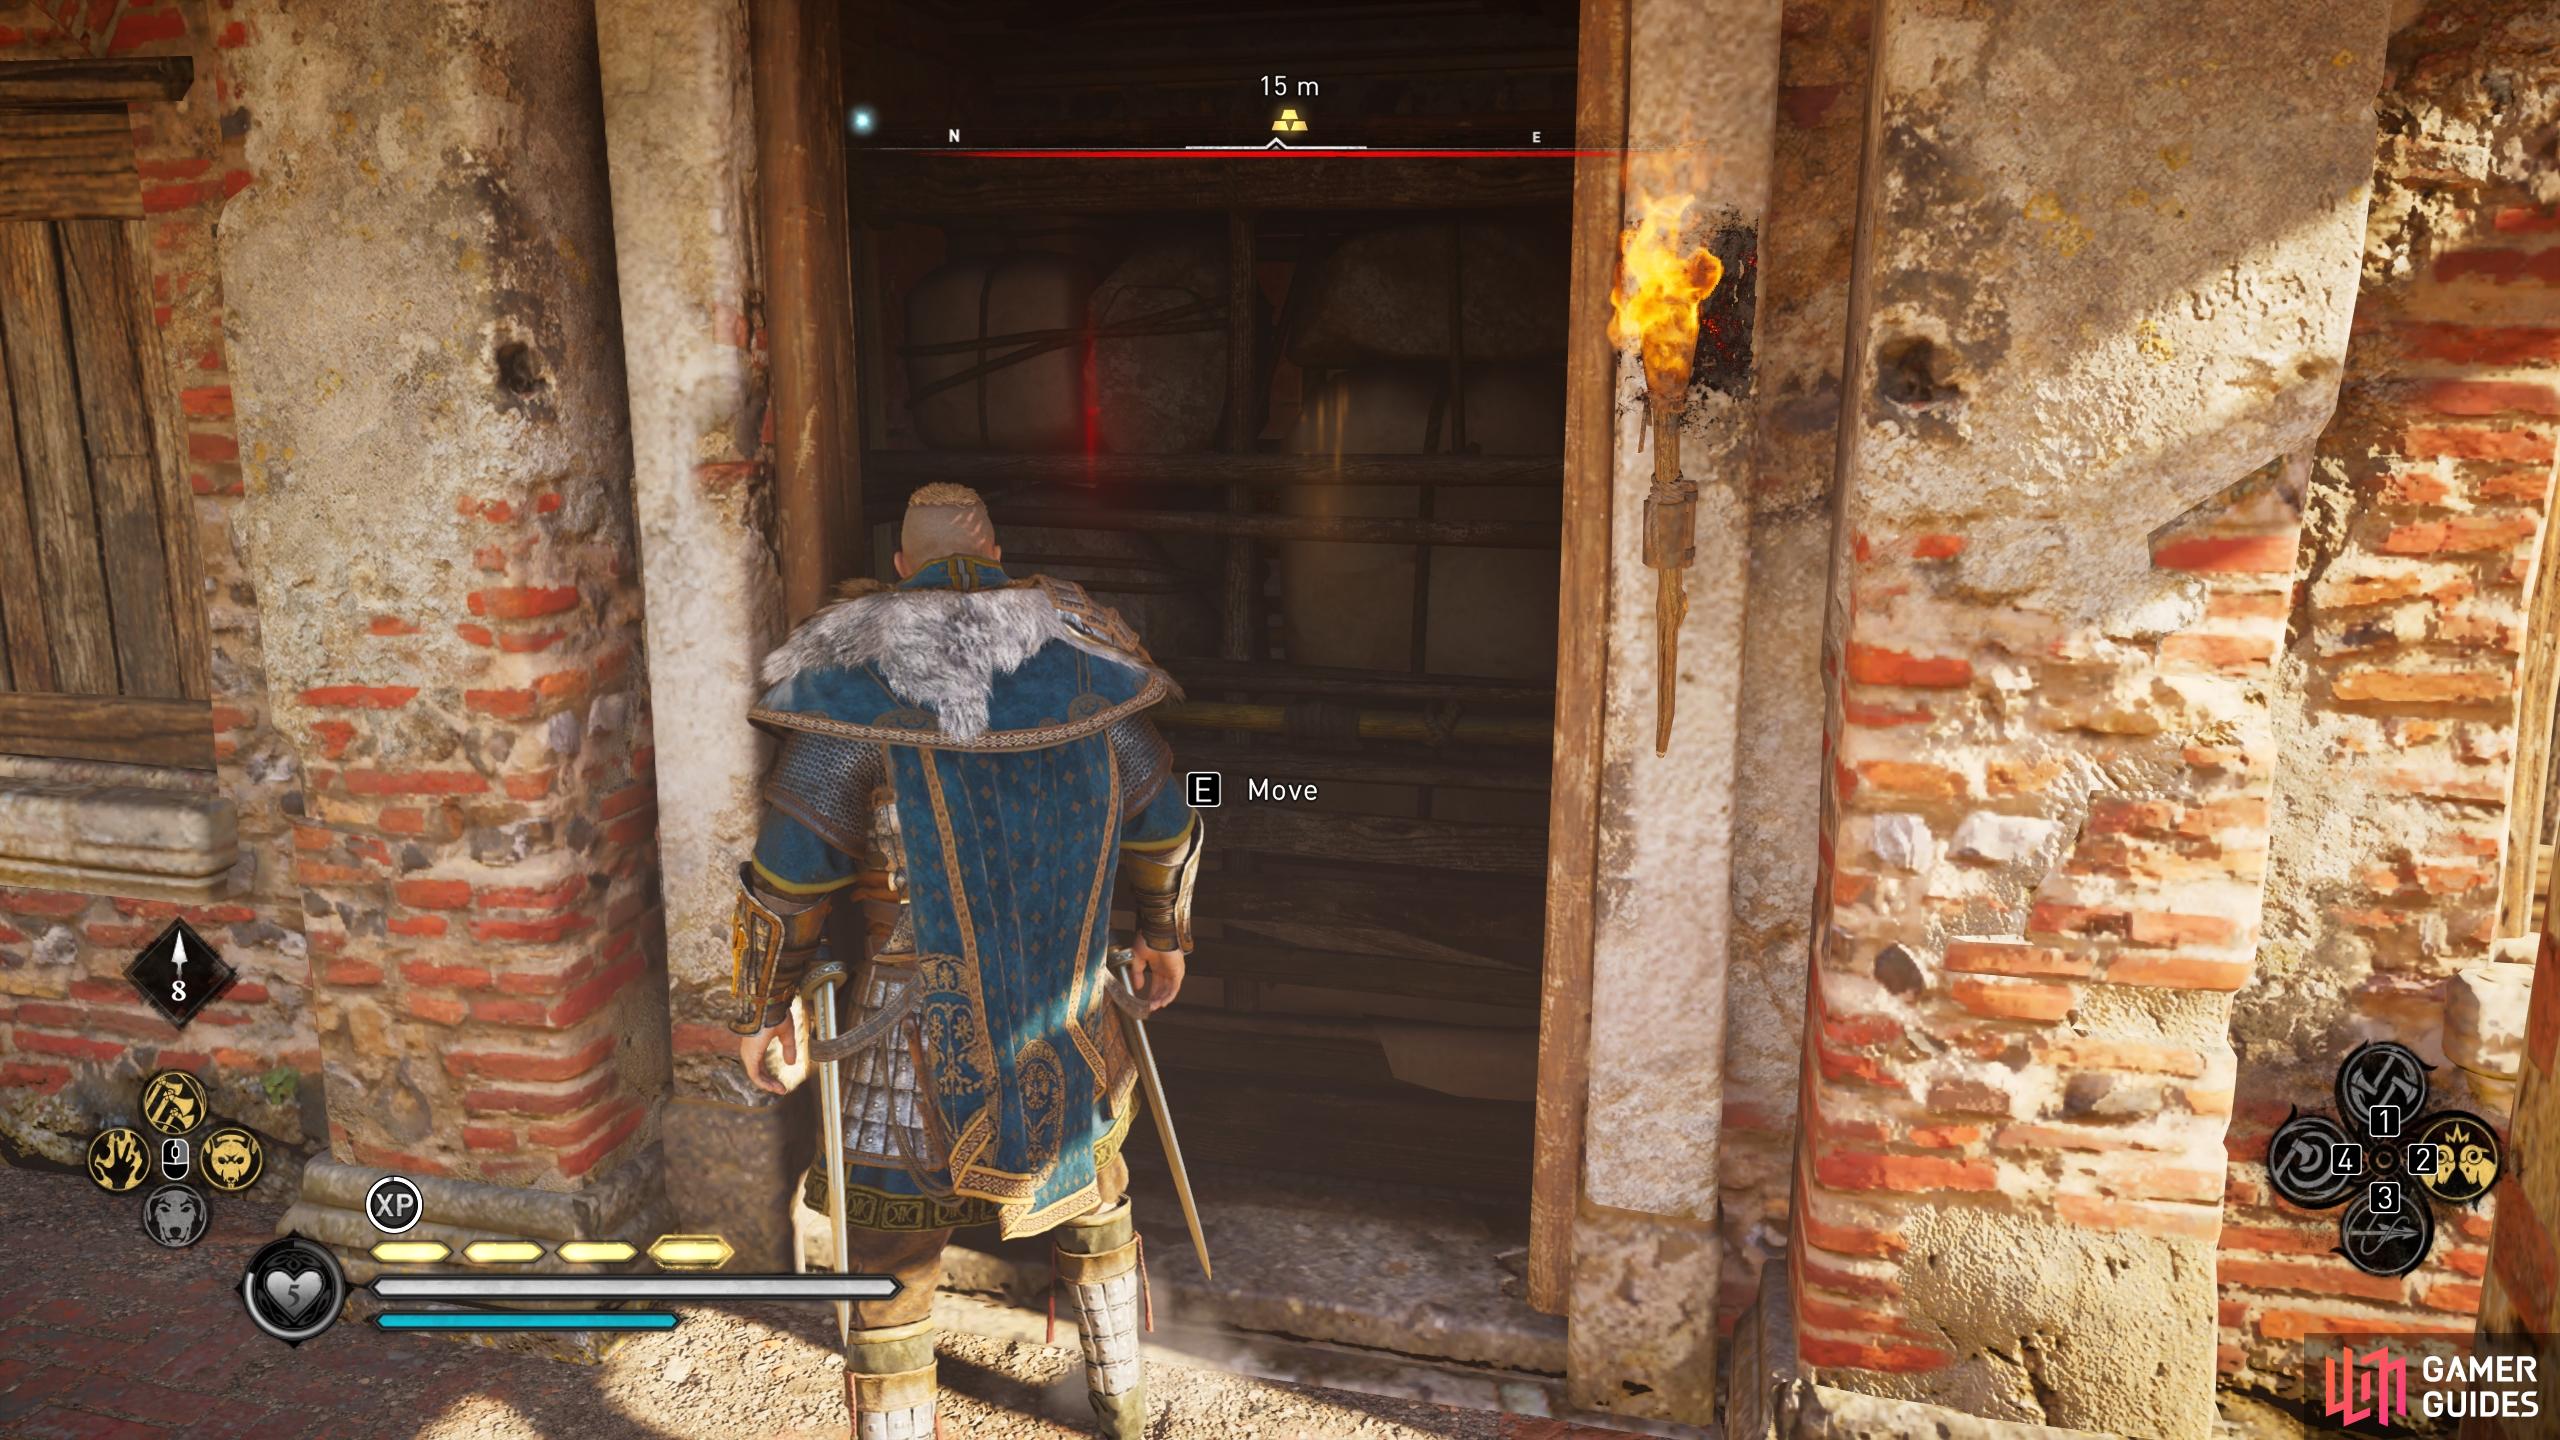 You can push the barricade inward once you've destroyed the pots and boxes on the other side.